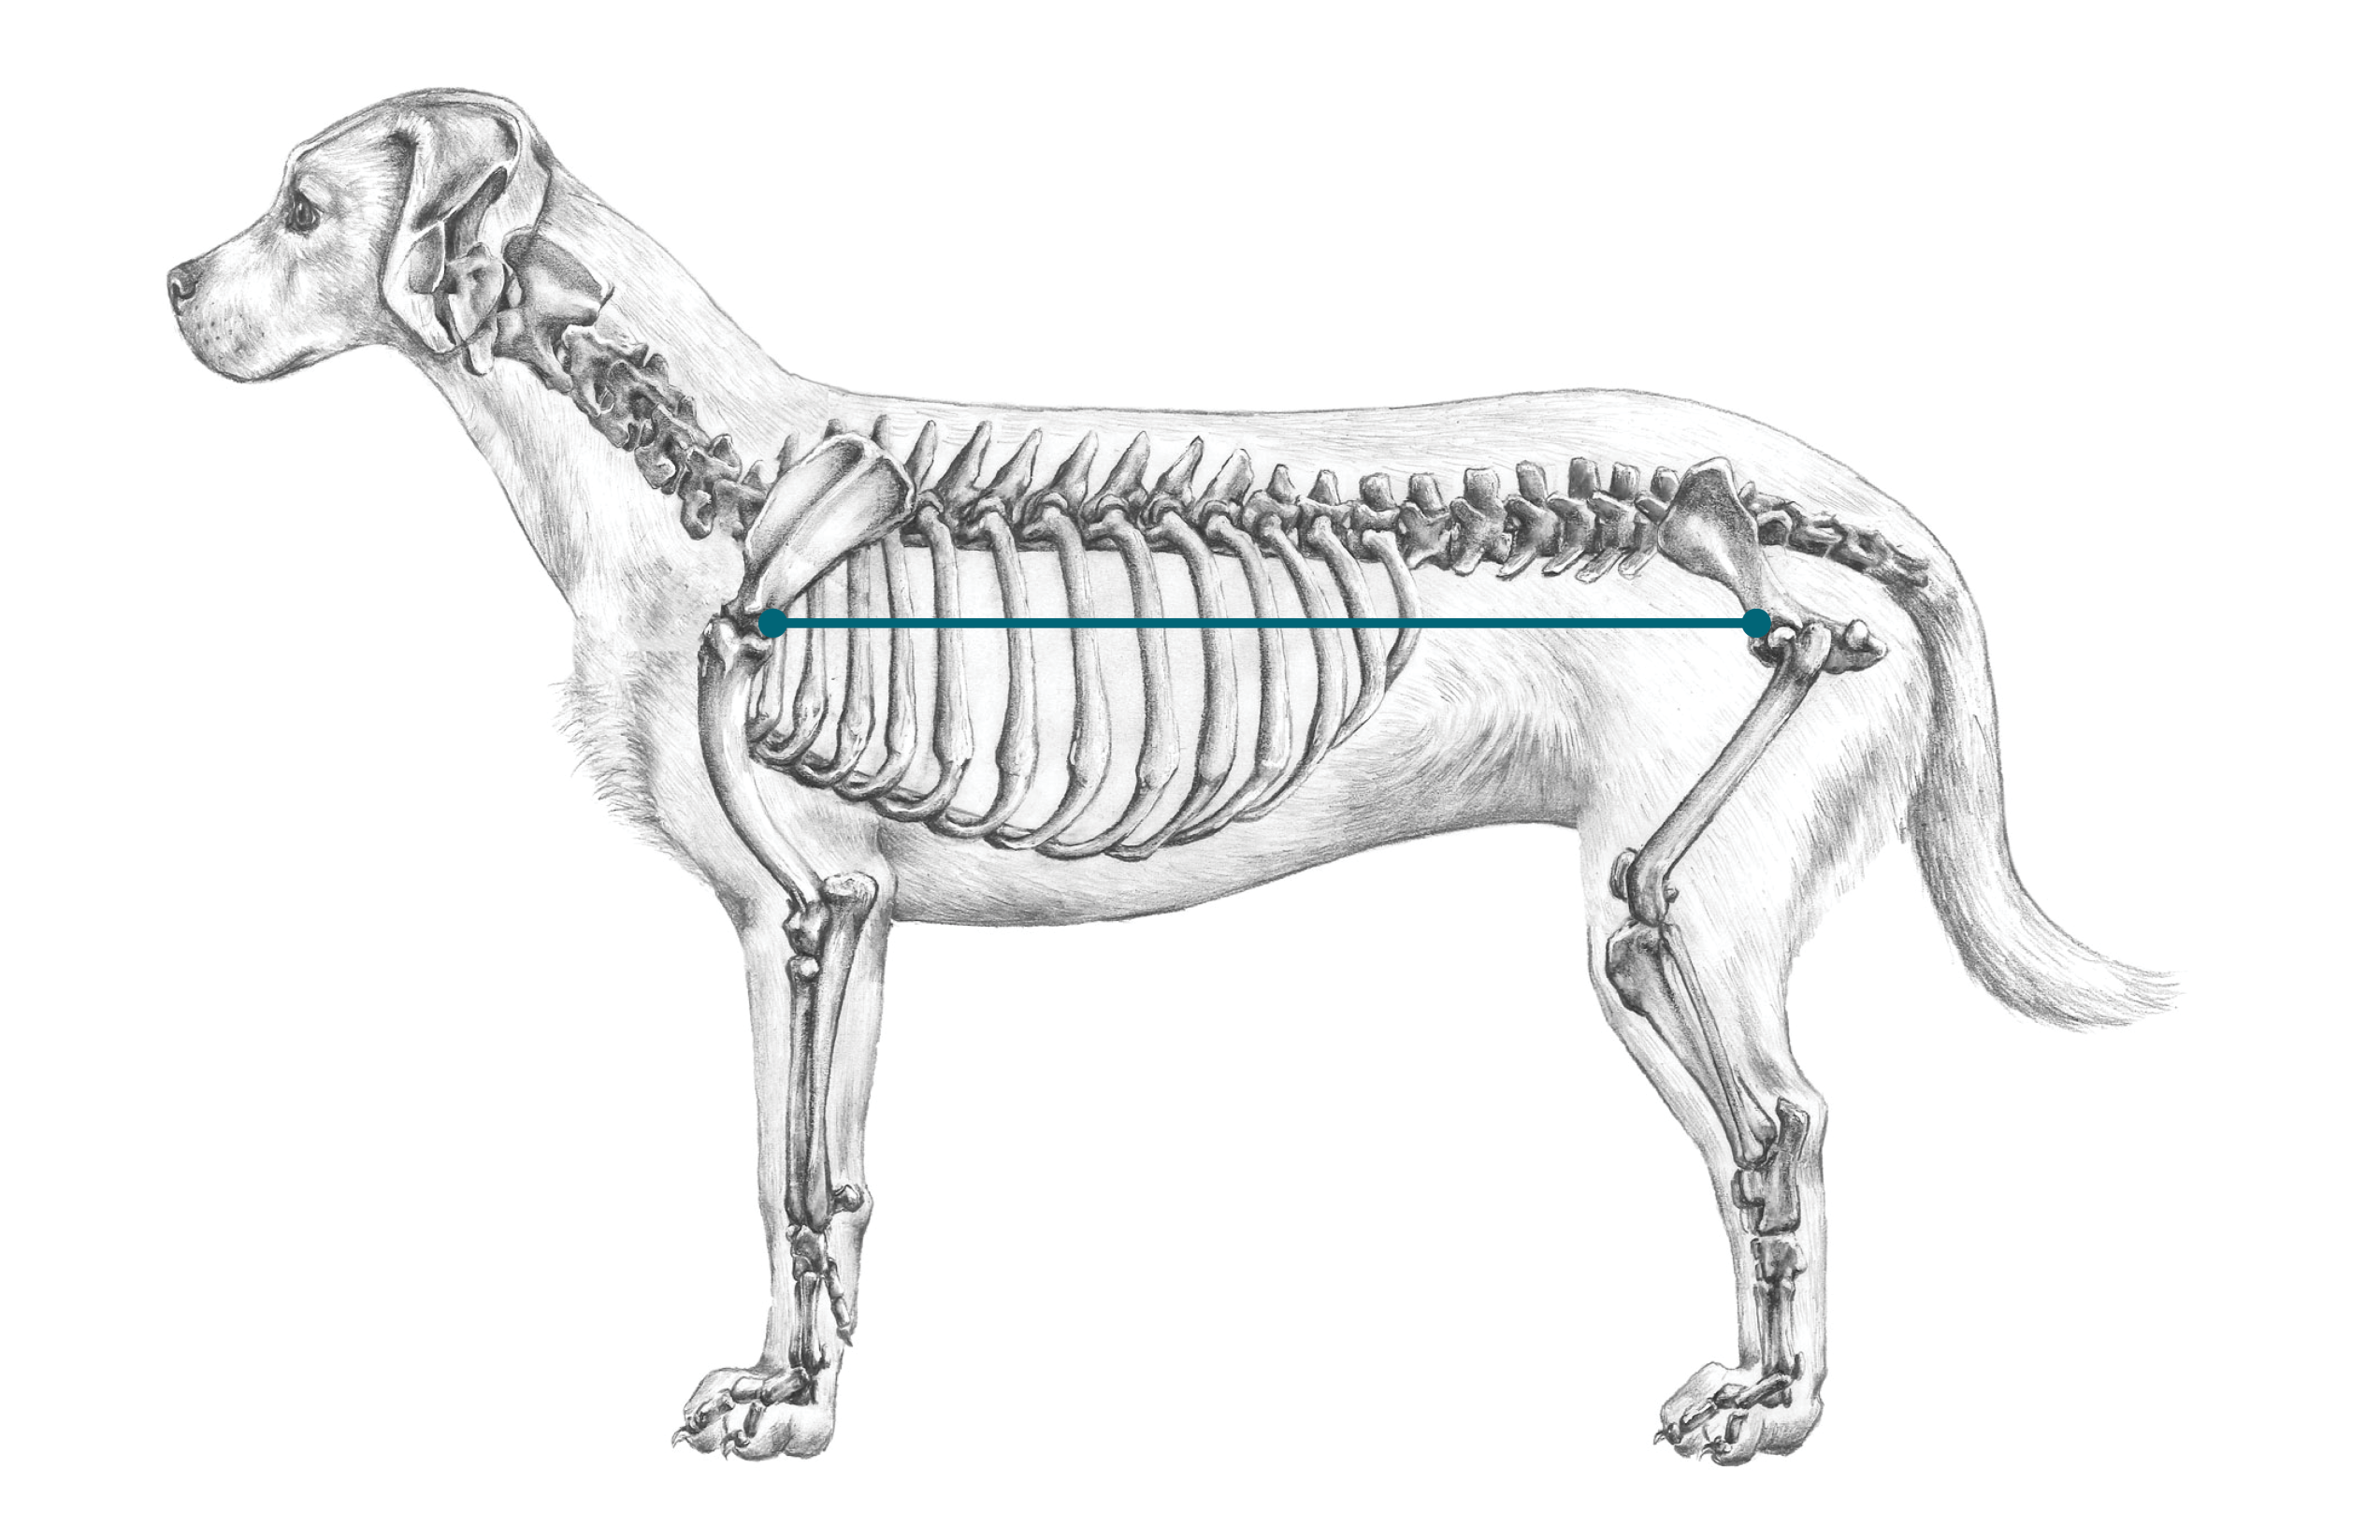 Illustration showing span from base of the tail to middle of the shoulder along dog's side, used to measure dog length